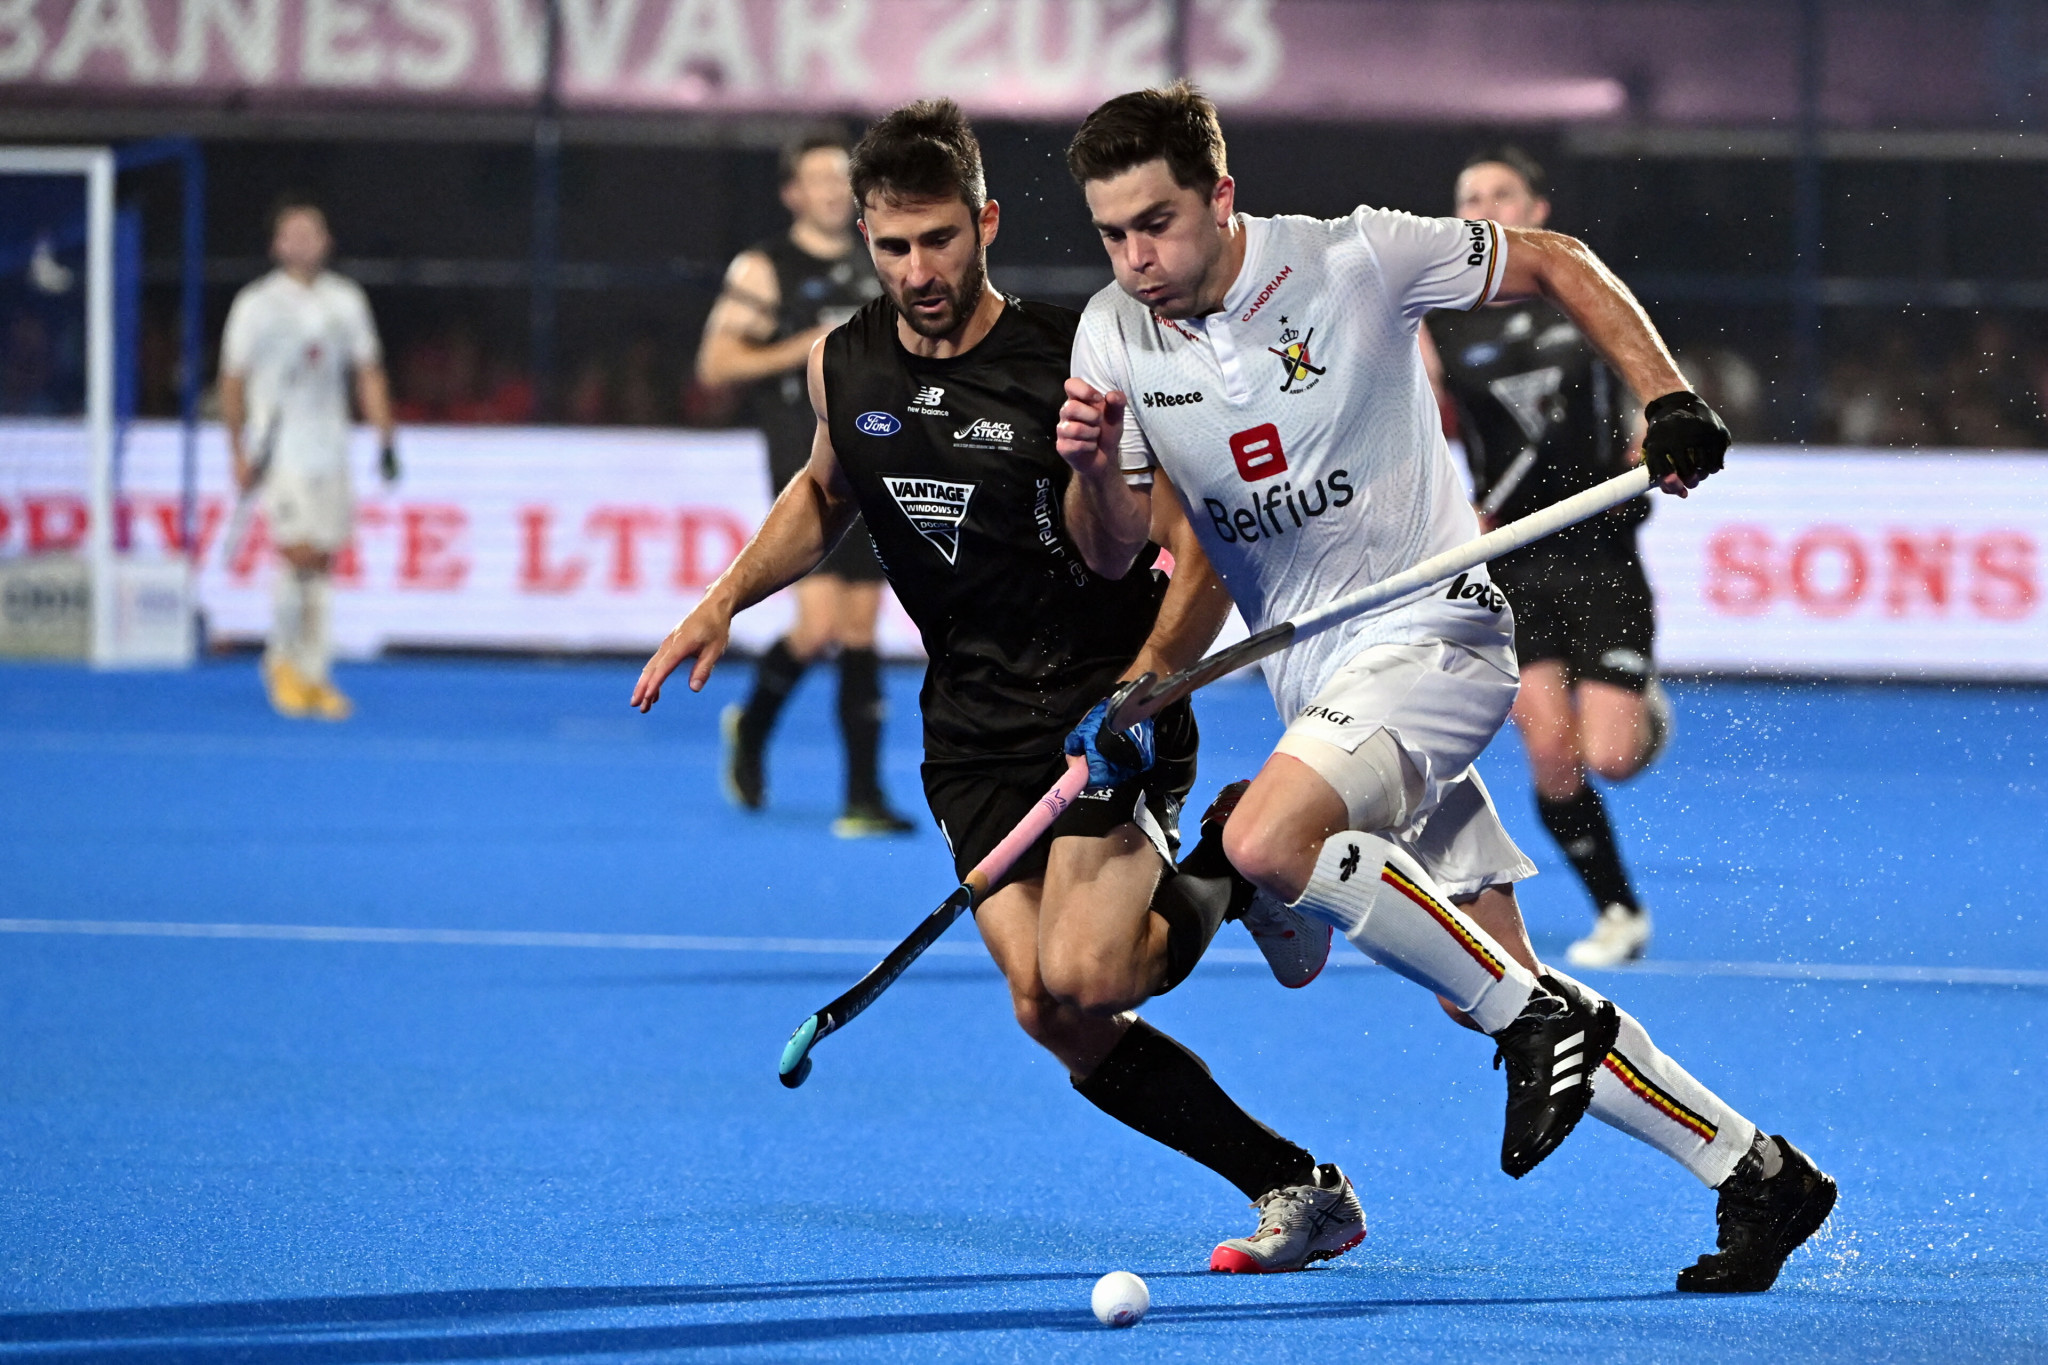 Holders Belgium, playing in white, reached the last four of the Men's Hockey World Cup after a 2-0 win over New Zealand ©Getty Images